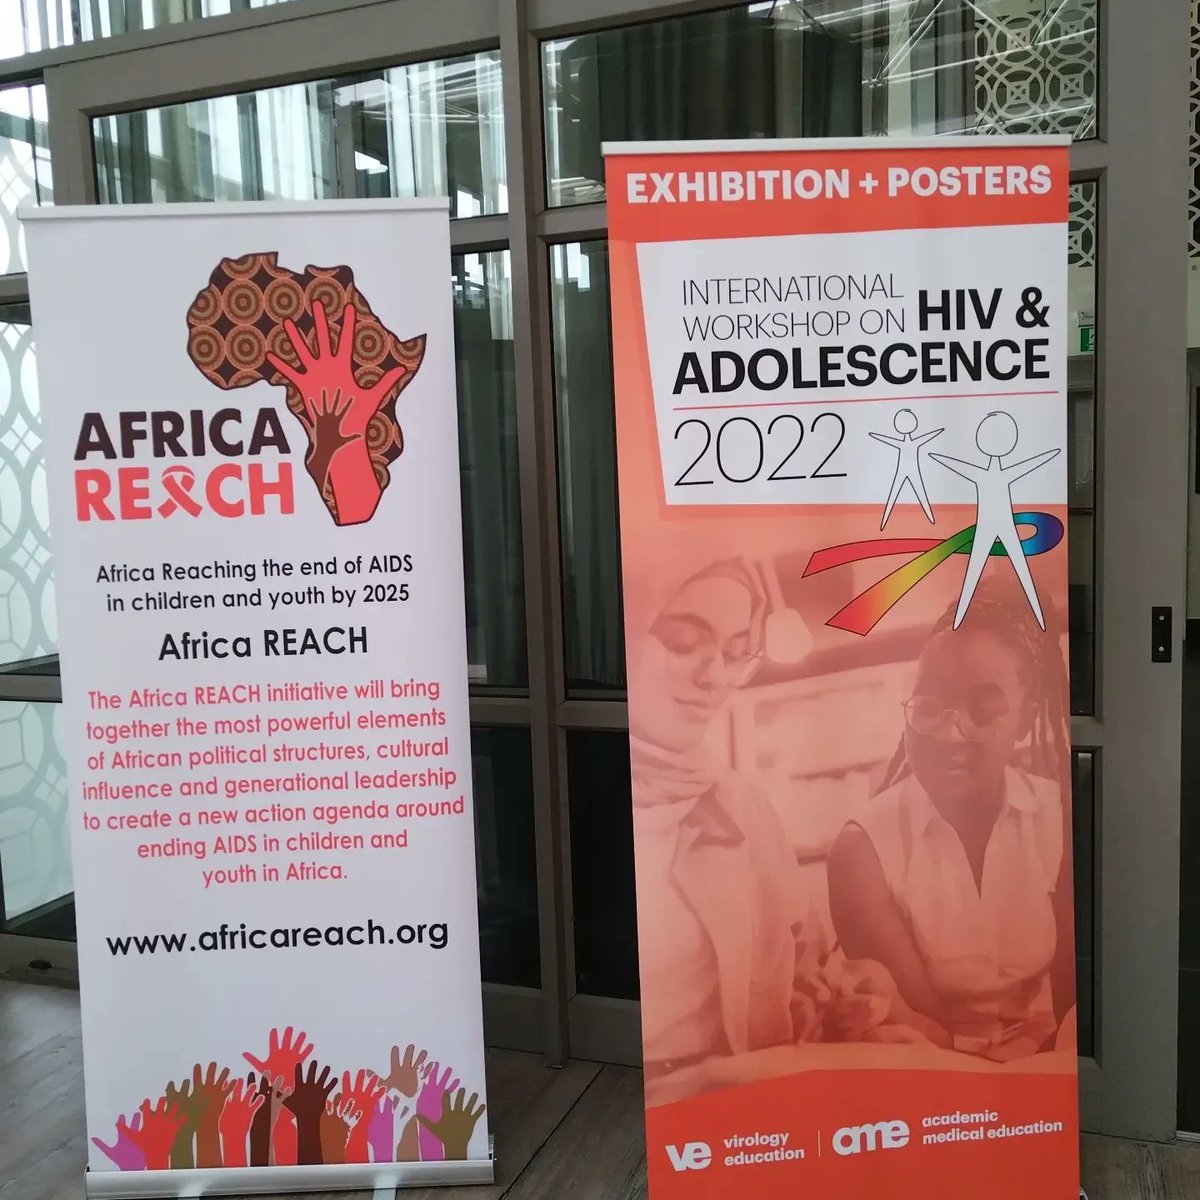 Africa REACH is at the International Workshop on HIV and Adolescence where we will be hosting the welcome reception in the evening.

#AfricaREACH
#EndingAIDS